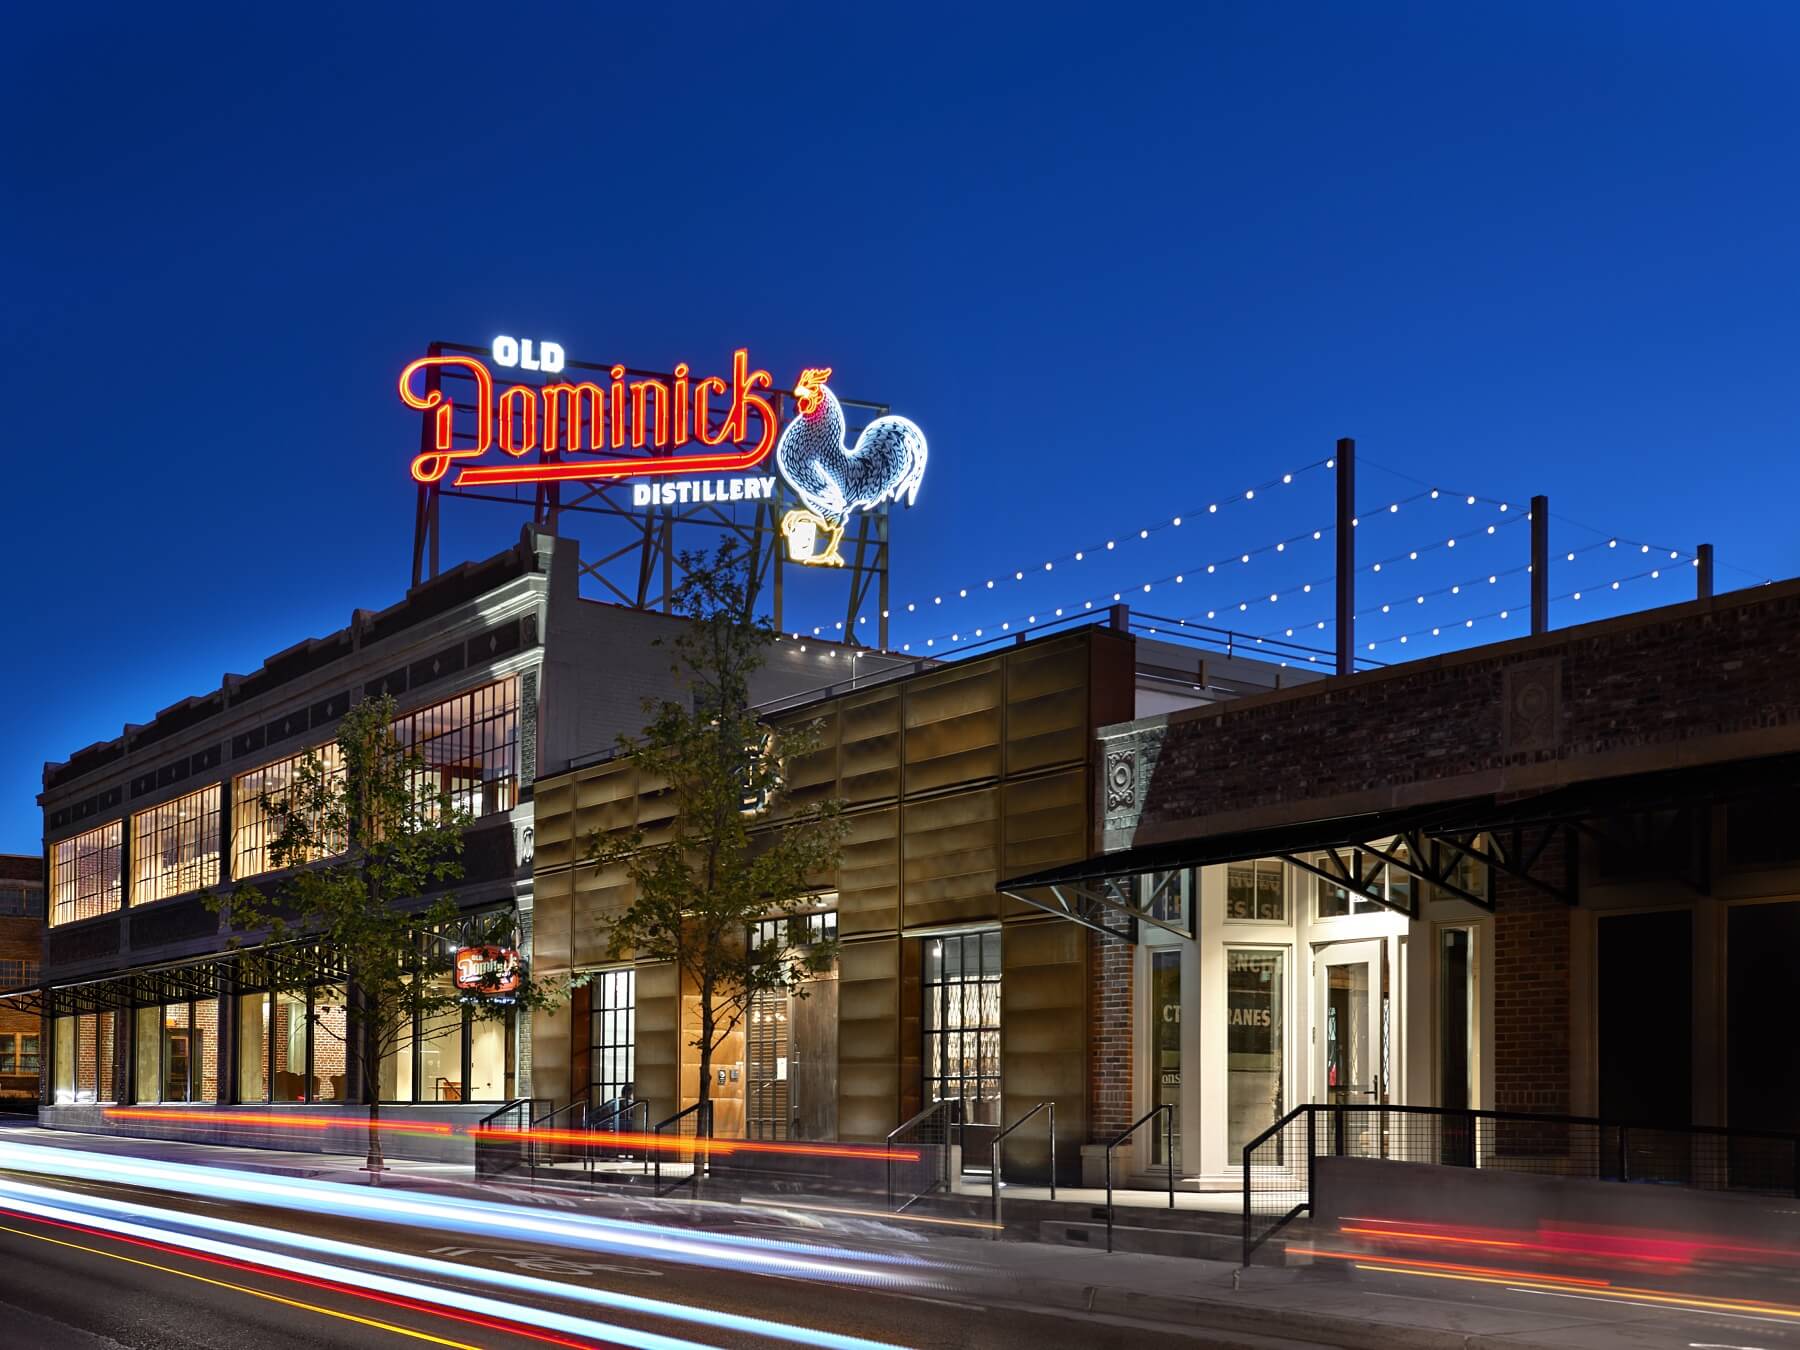 Exterior of Old Dominick Distillery with neon sign lit up at night.